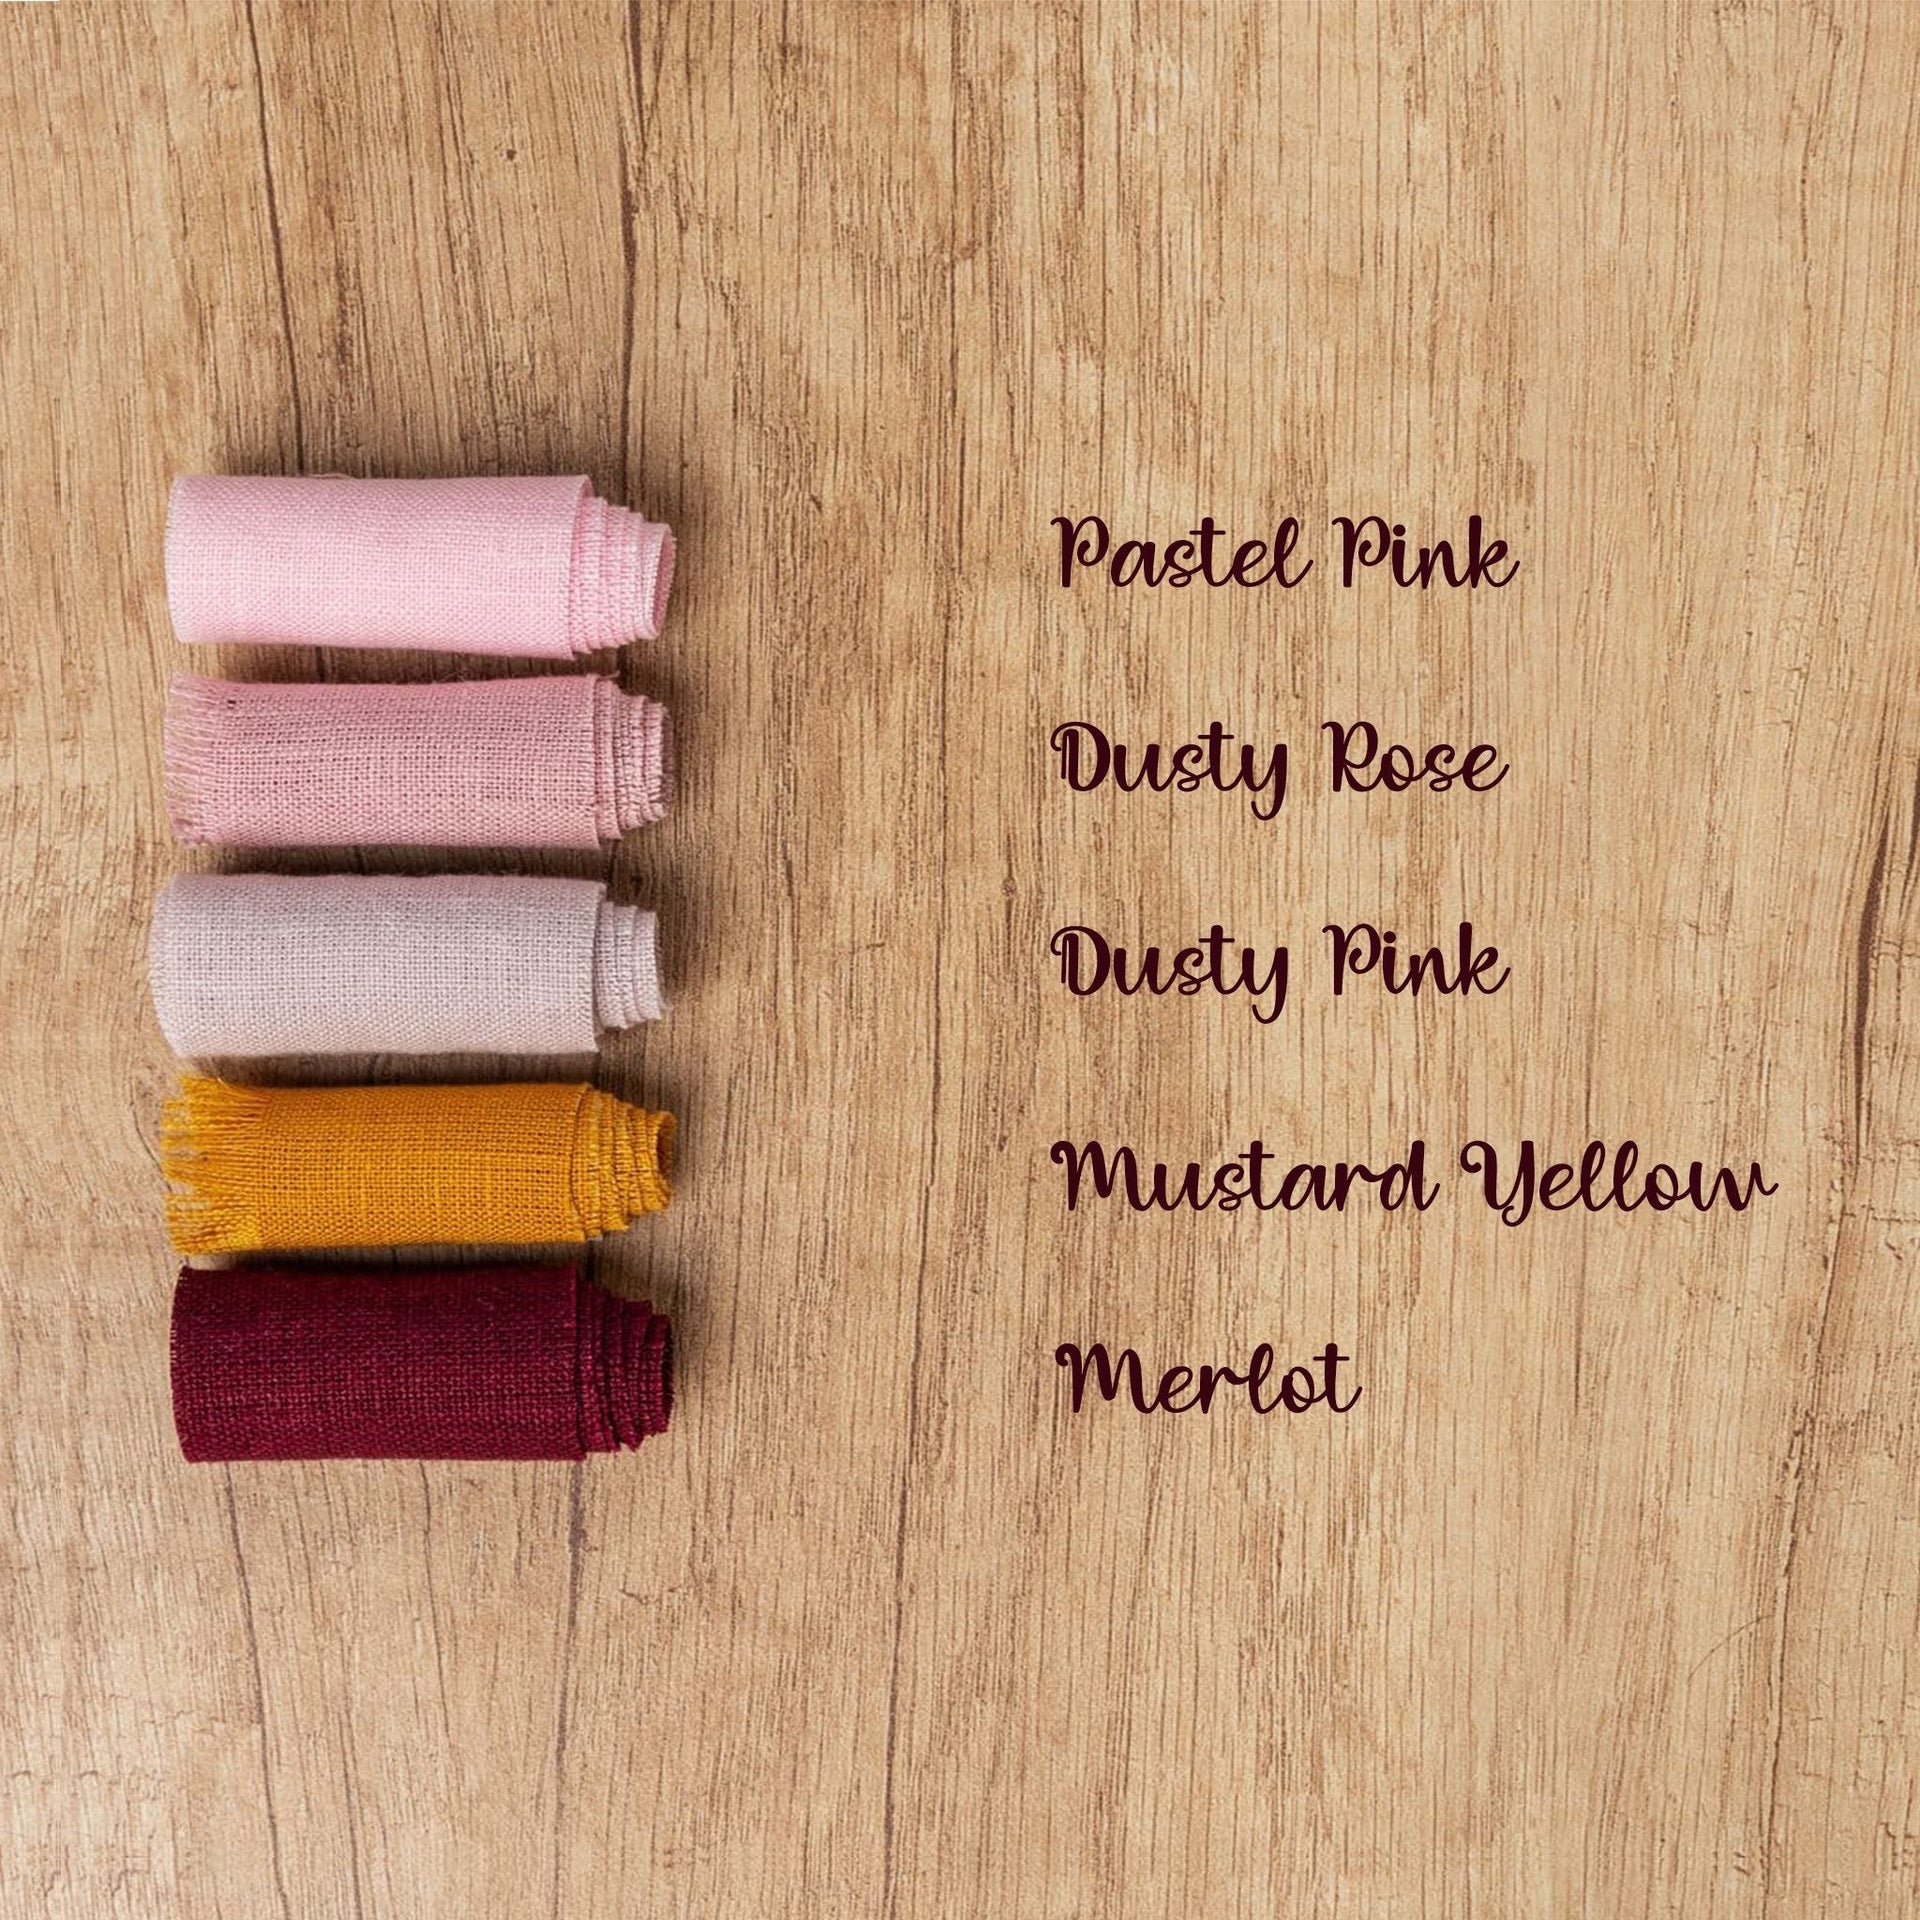 @color:Mustard Yellow,color:Dusty Pink,color:Dusty Rose, color:Pastel Pink, color:Merlo